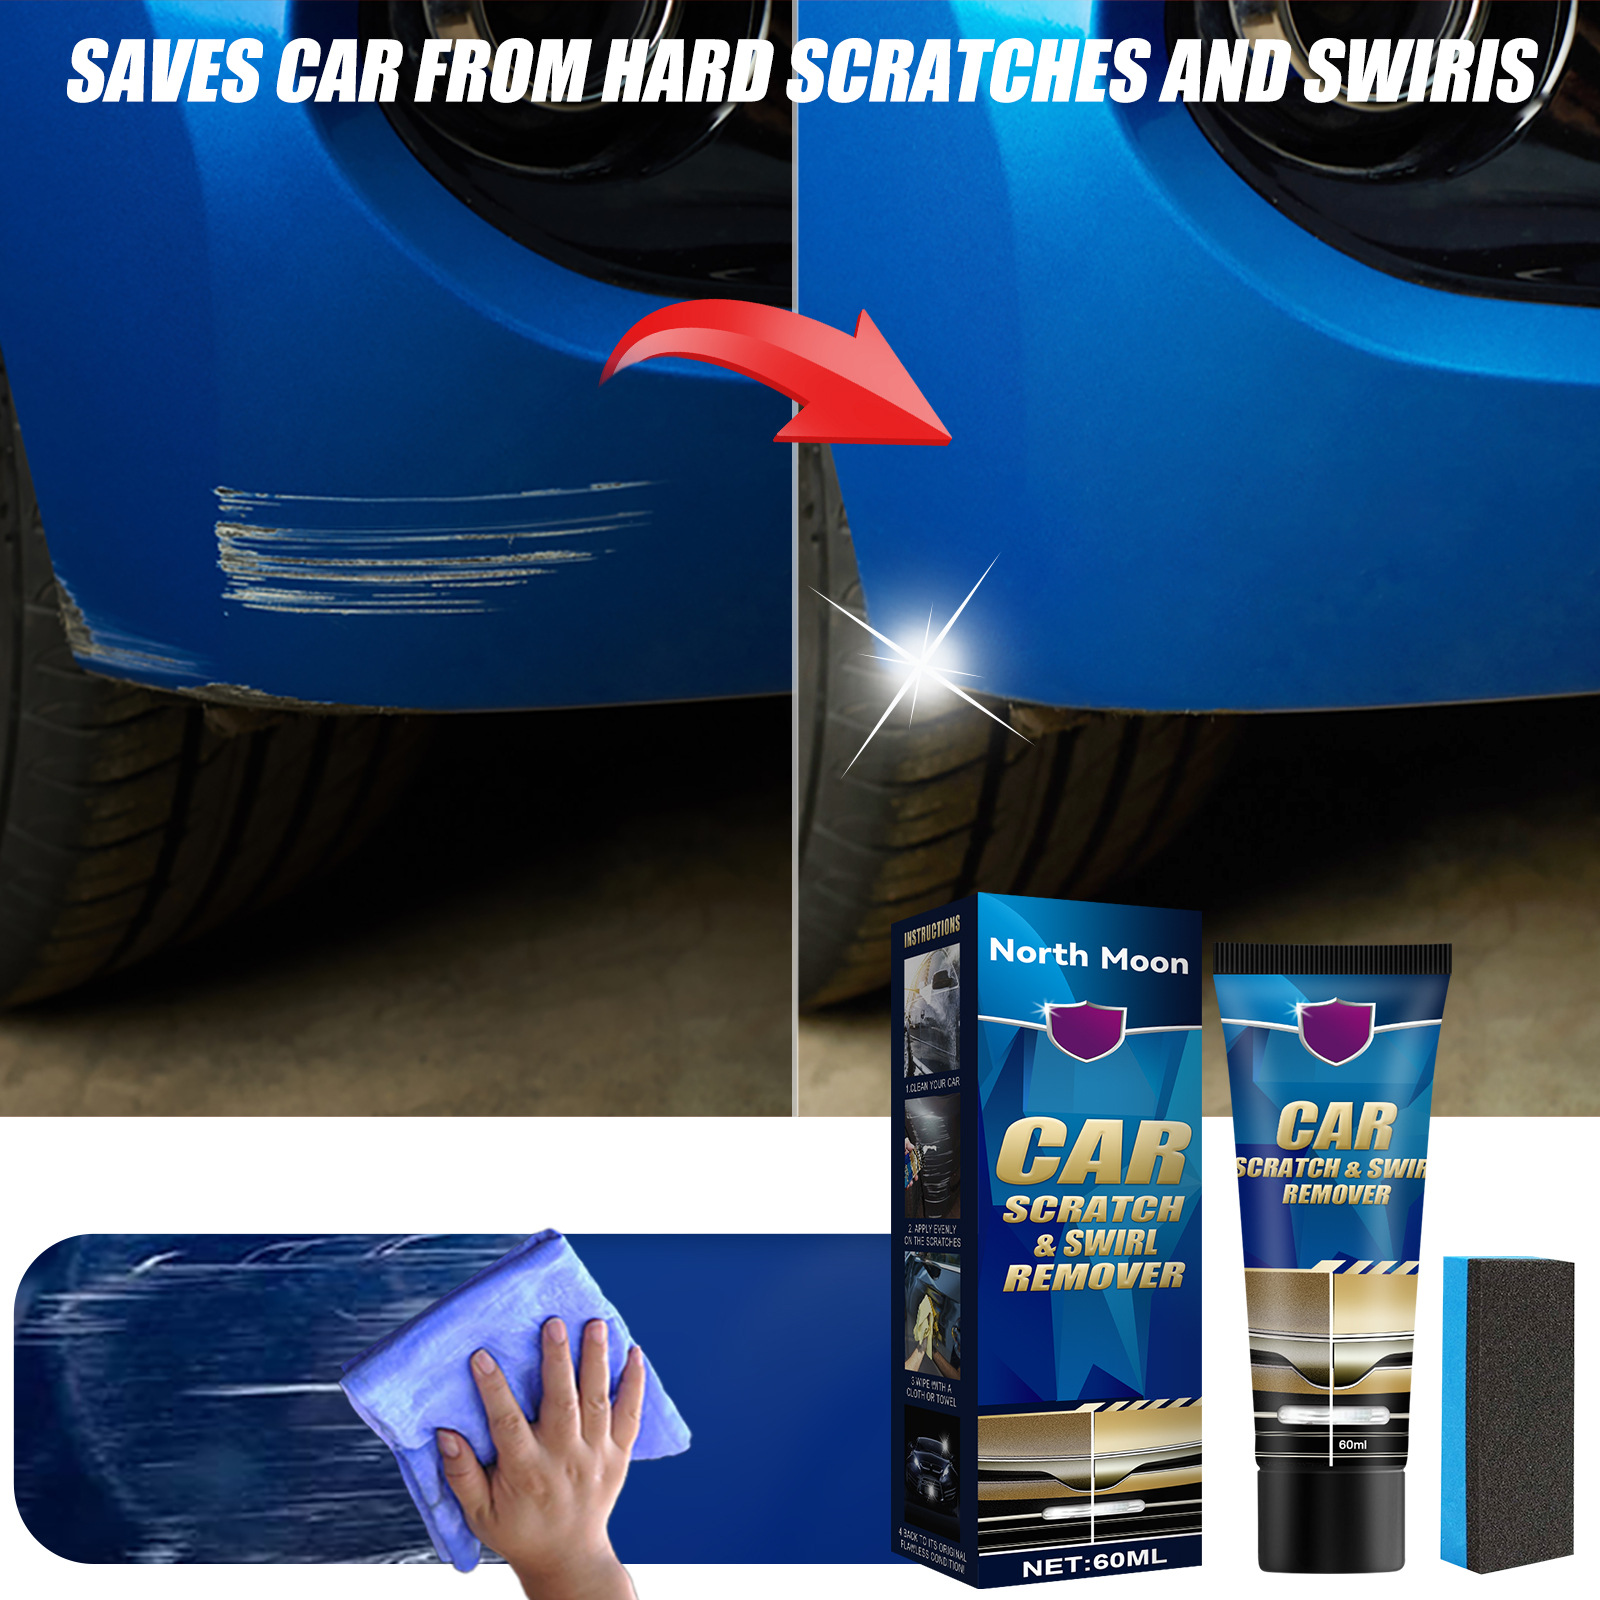 Auto Sticker Remover Spray Car Body Compound Paste Set Paint Scratch Repair  Kit Glue Removal Sticker Cleaner Glue For Cars - AliExpress